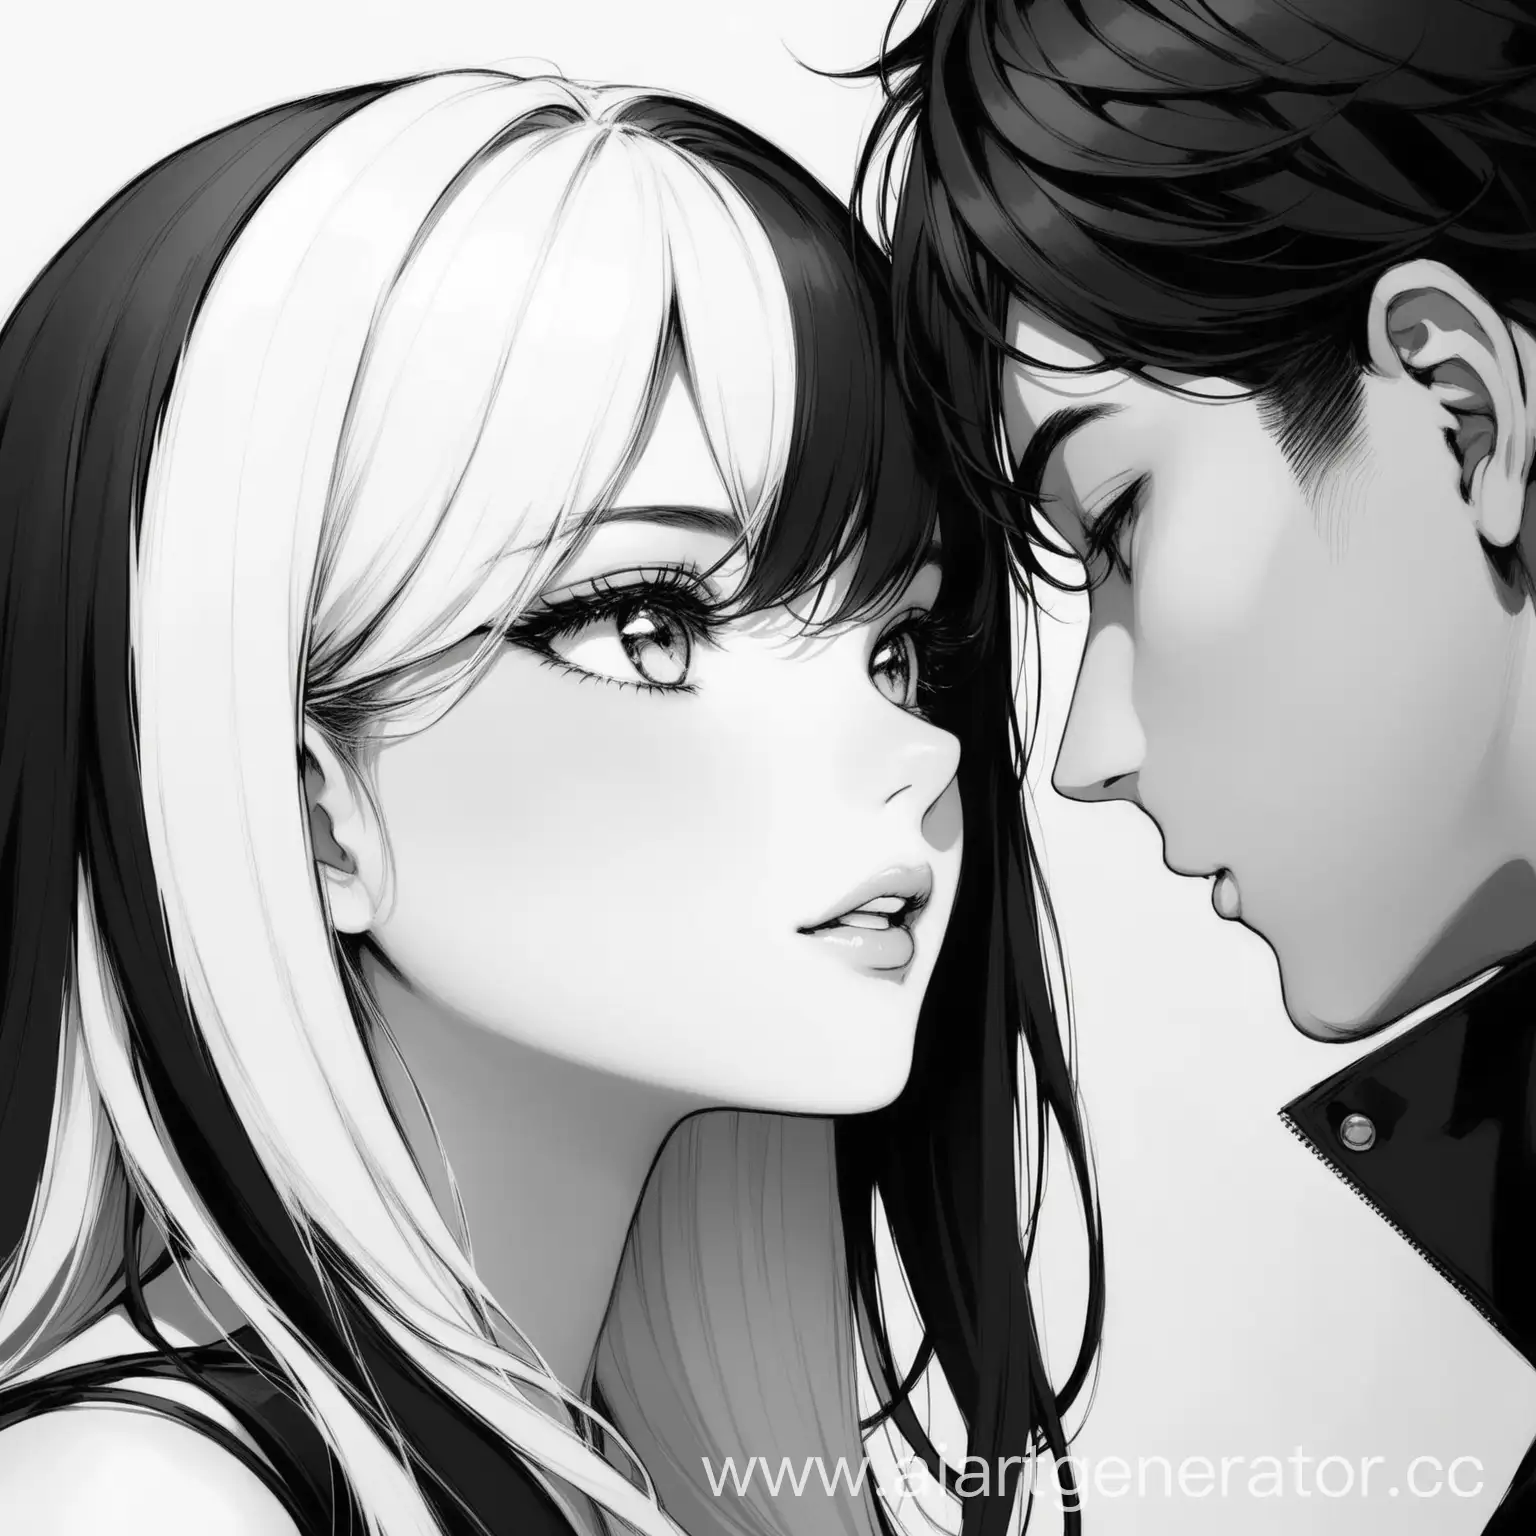 Monochrome-Romance-Tender-Embrace-in-Black-and-White